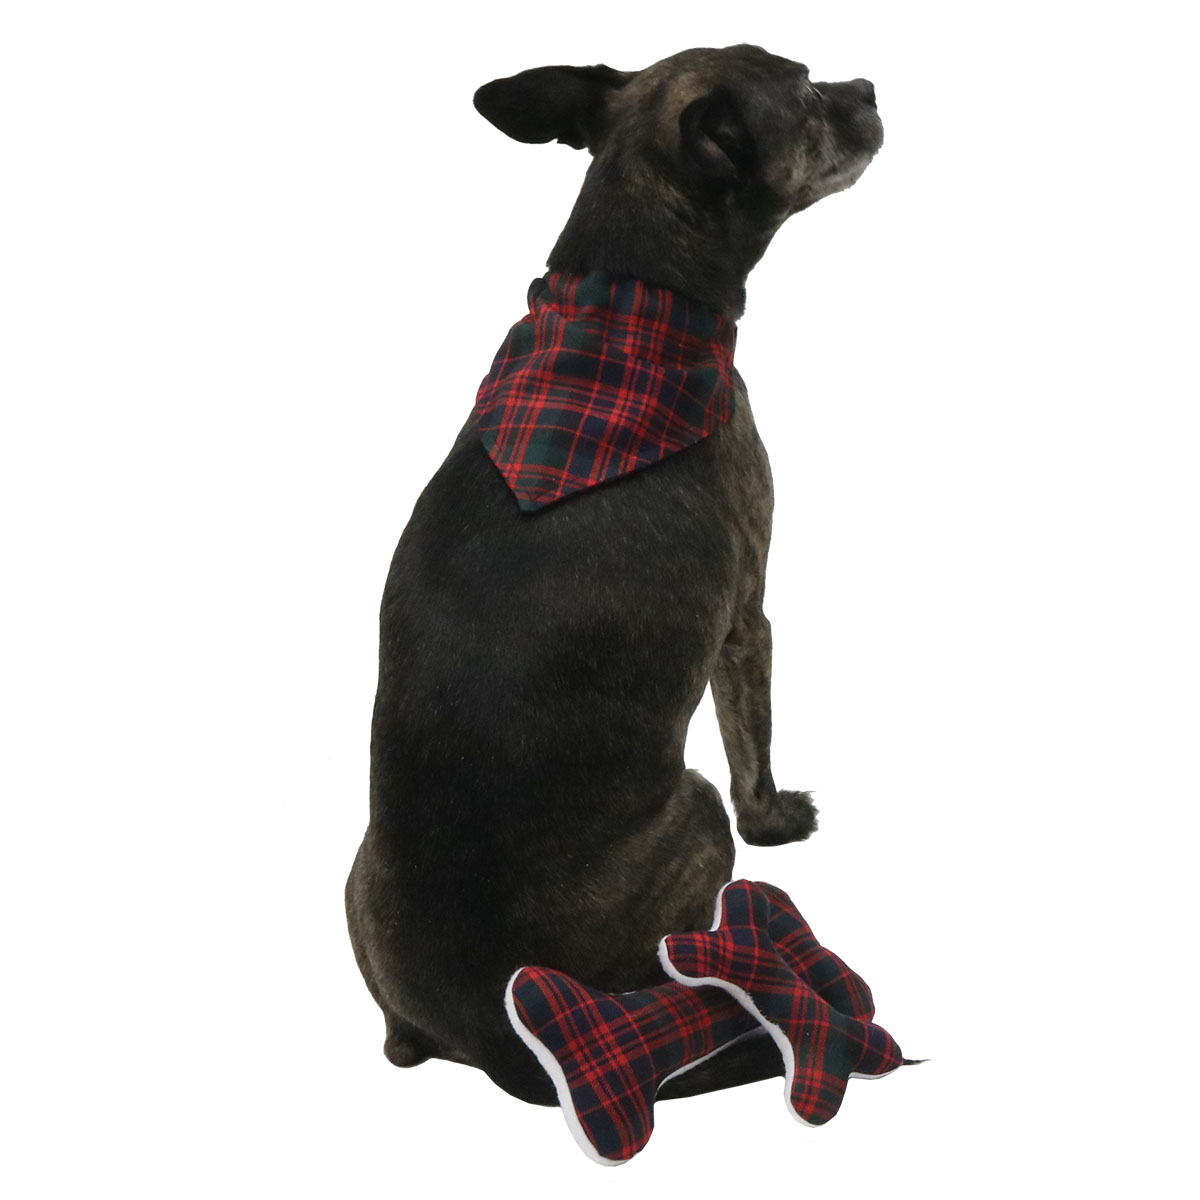 Scottish Dog Bouncy Puppets springy wooden home decoration Tartan hat scarf 